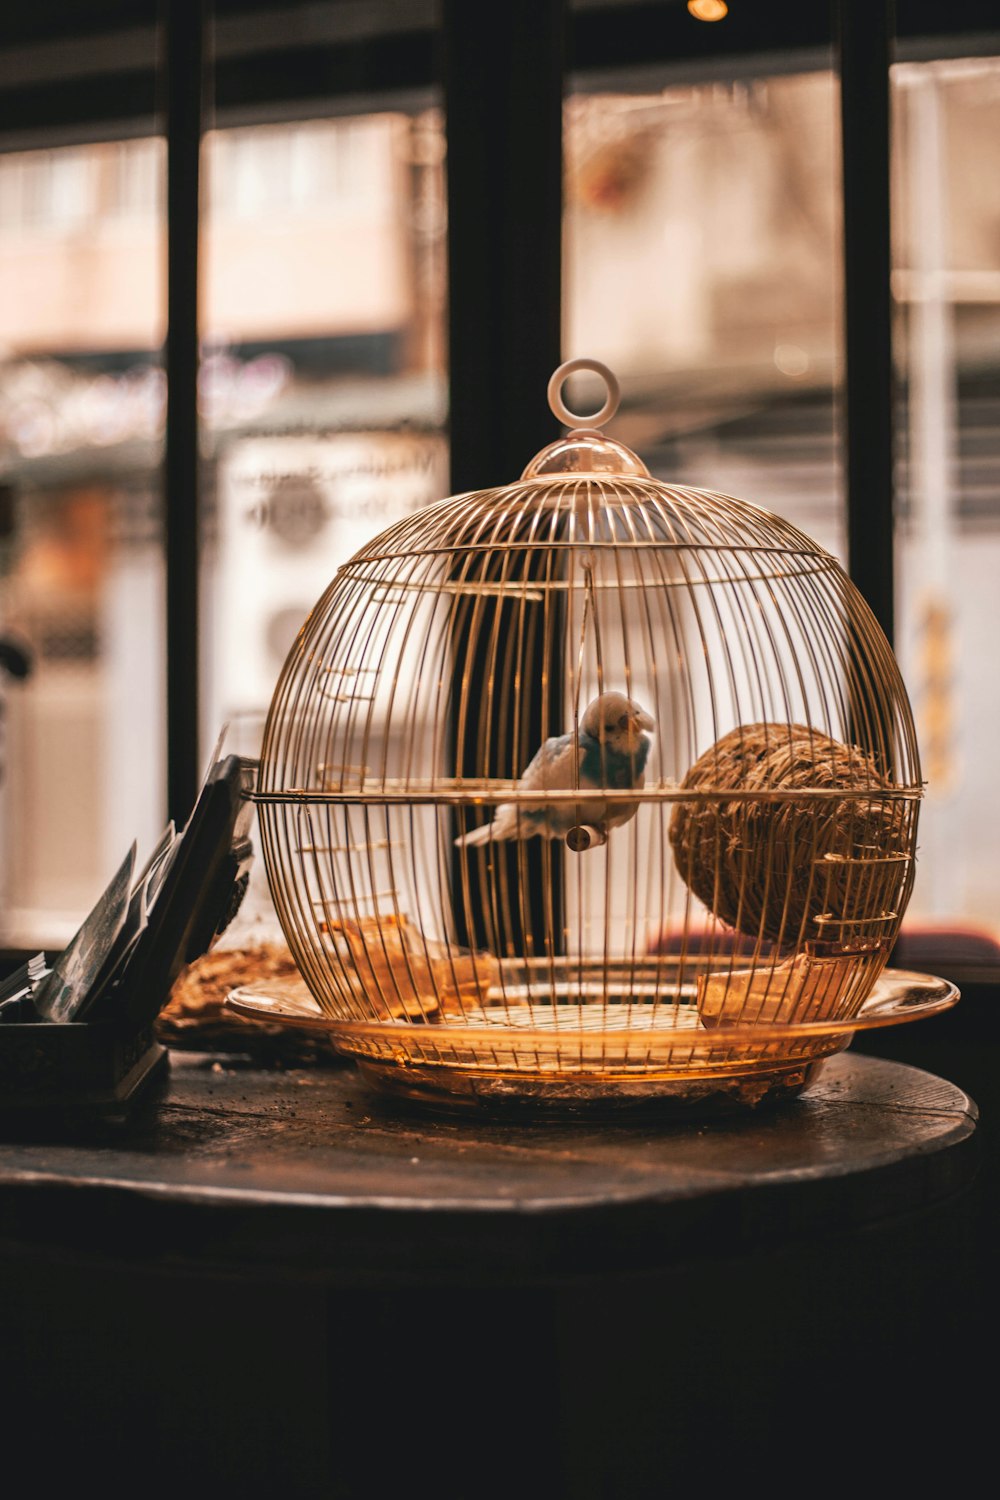 Bird In A Cage Pictures | Download Free Images on Unsplash